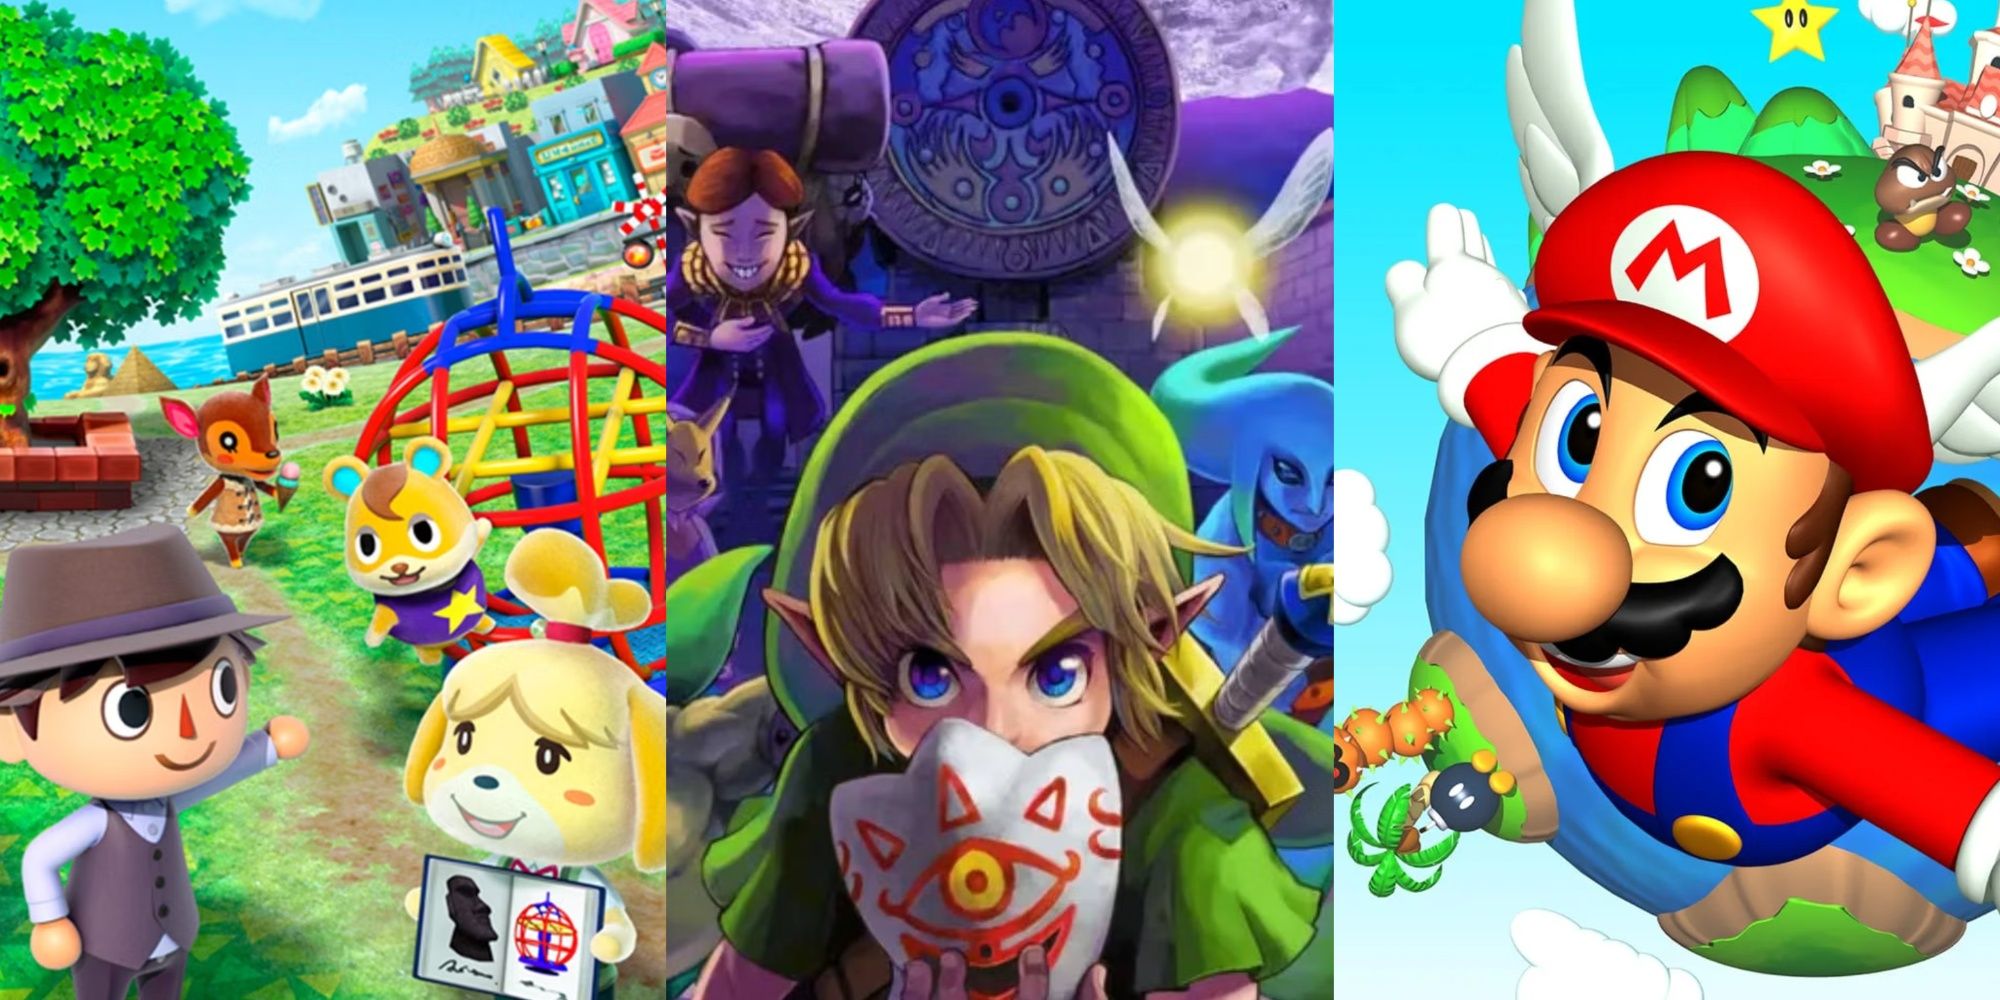 The best Nintendo games of all time